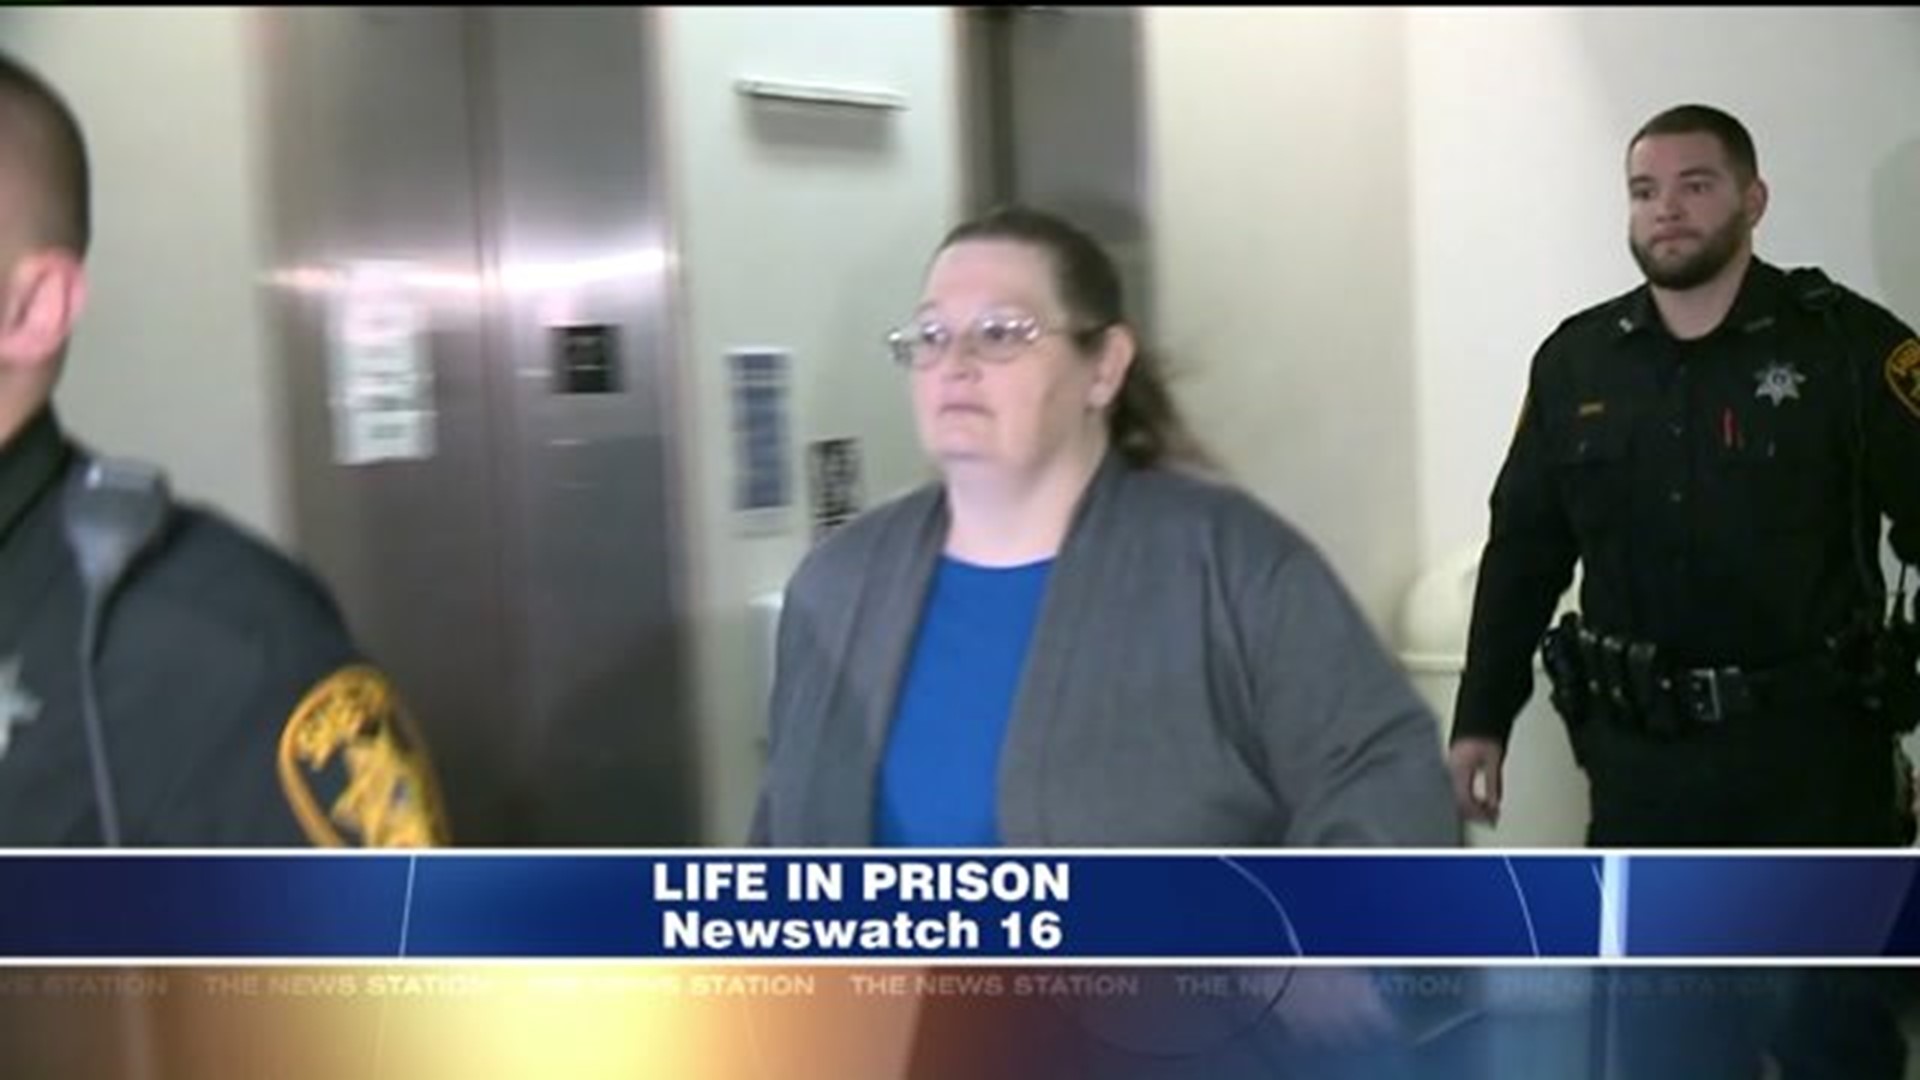 Life Sentence for Woman in Death, Dismemberment Case